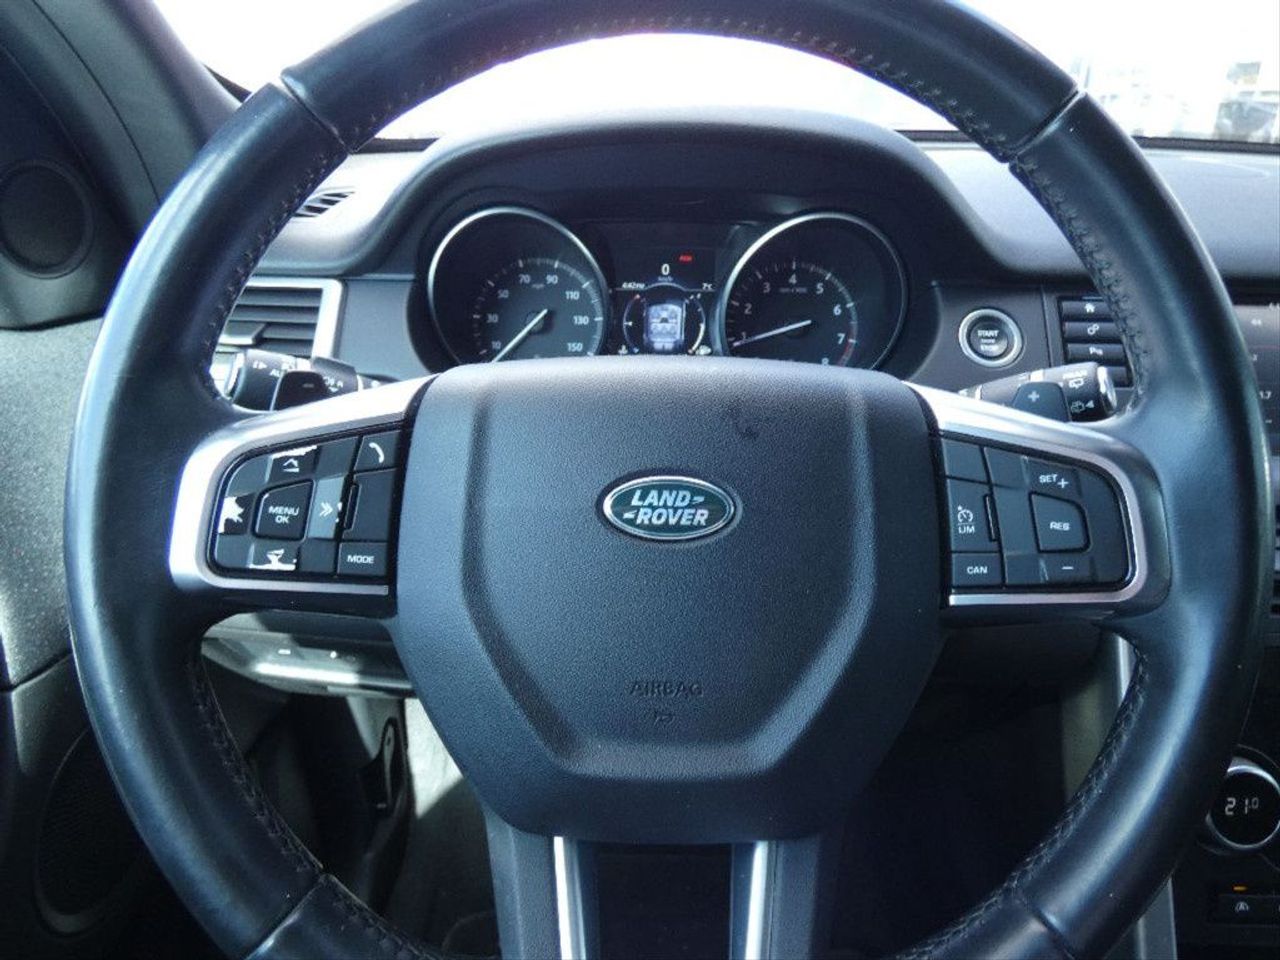 Foto Land-Rover Discovery Sport 29